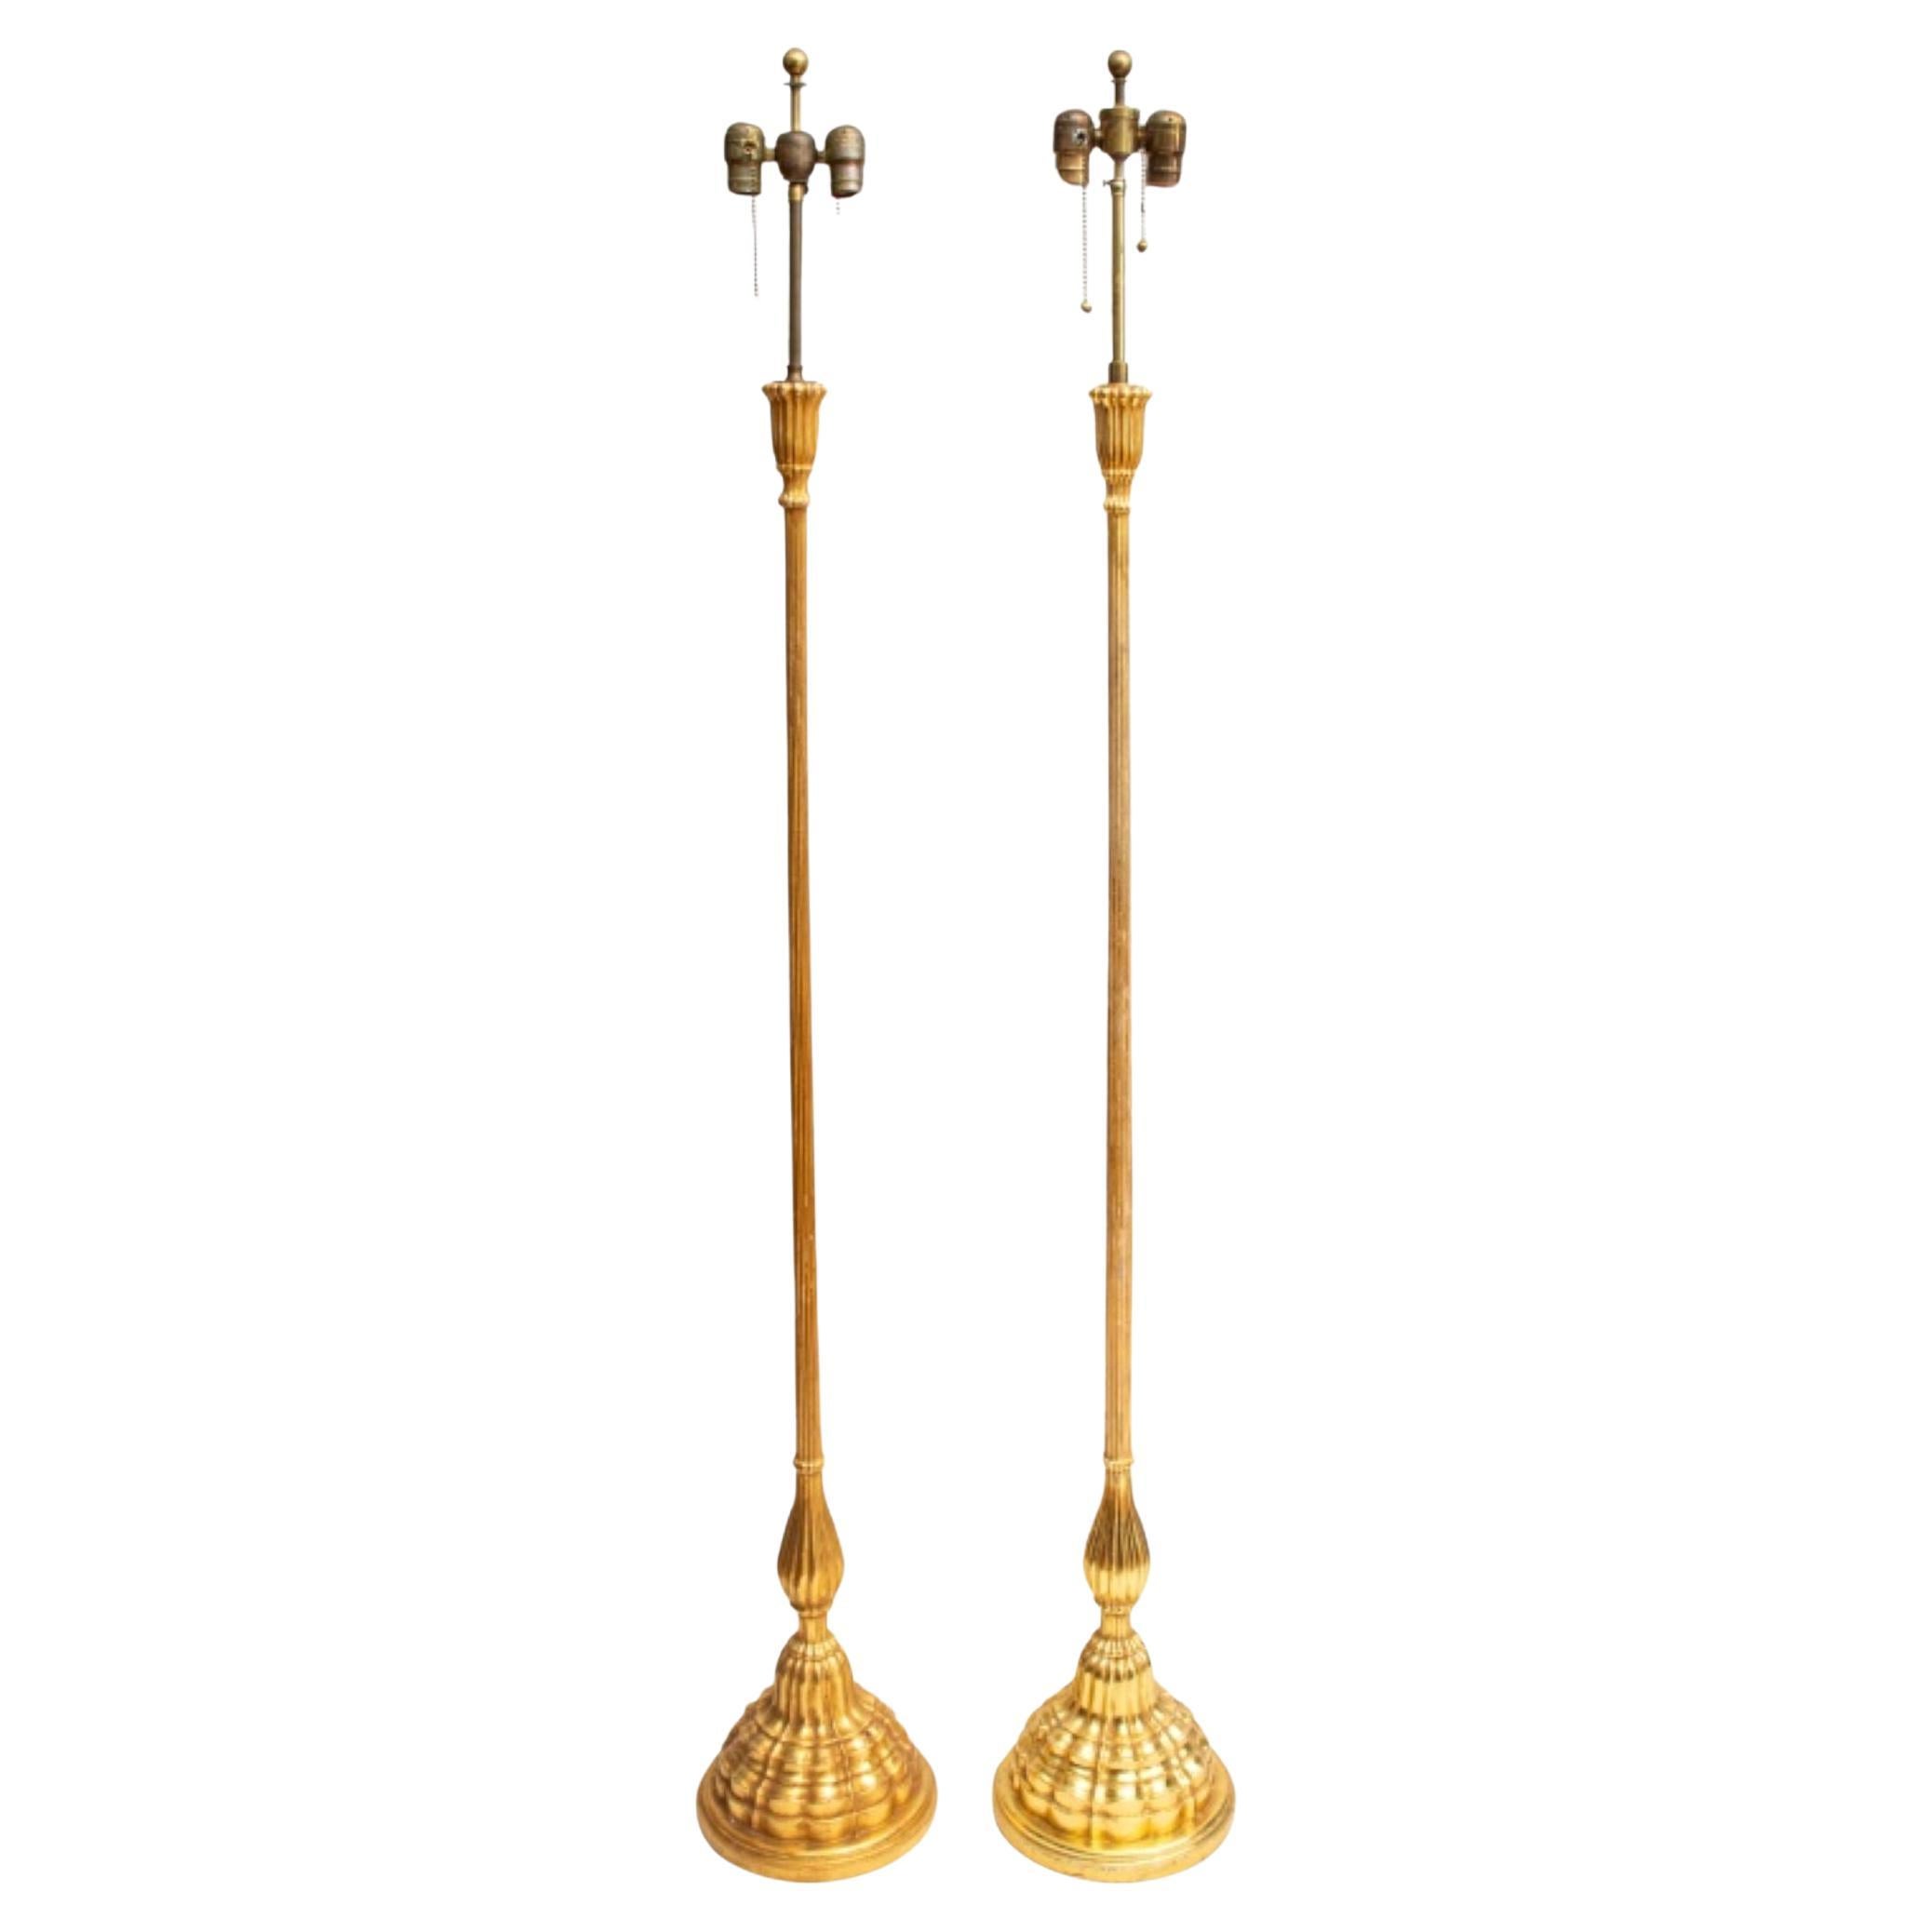 Neoclassical Gilt Composition Floor Lamps, Pair For Sale